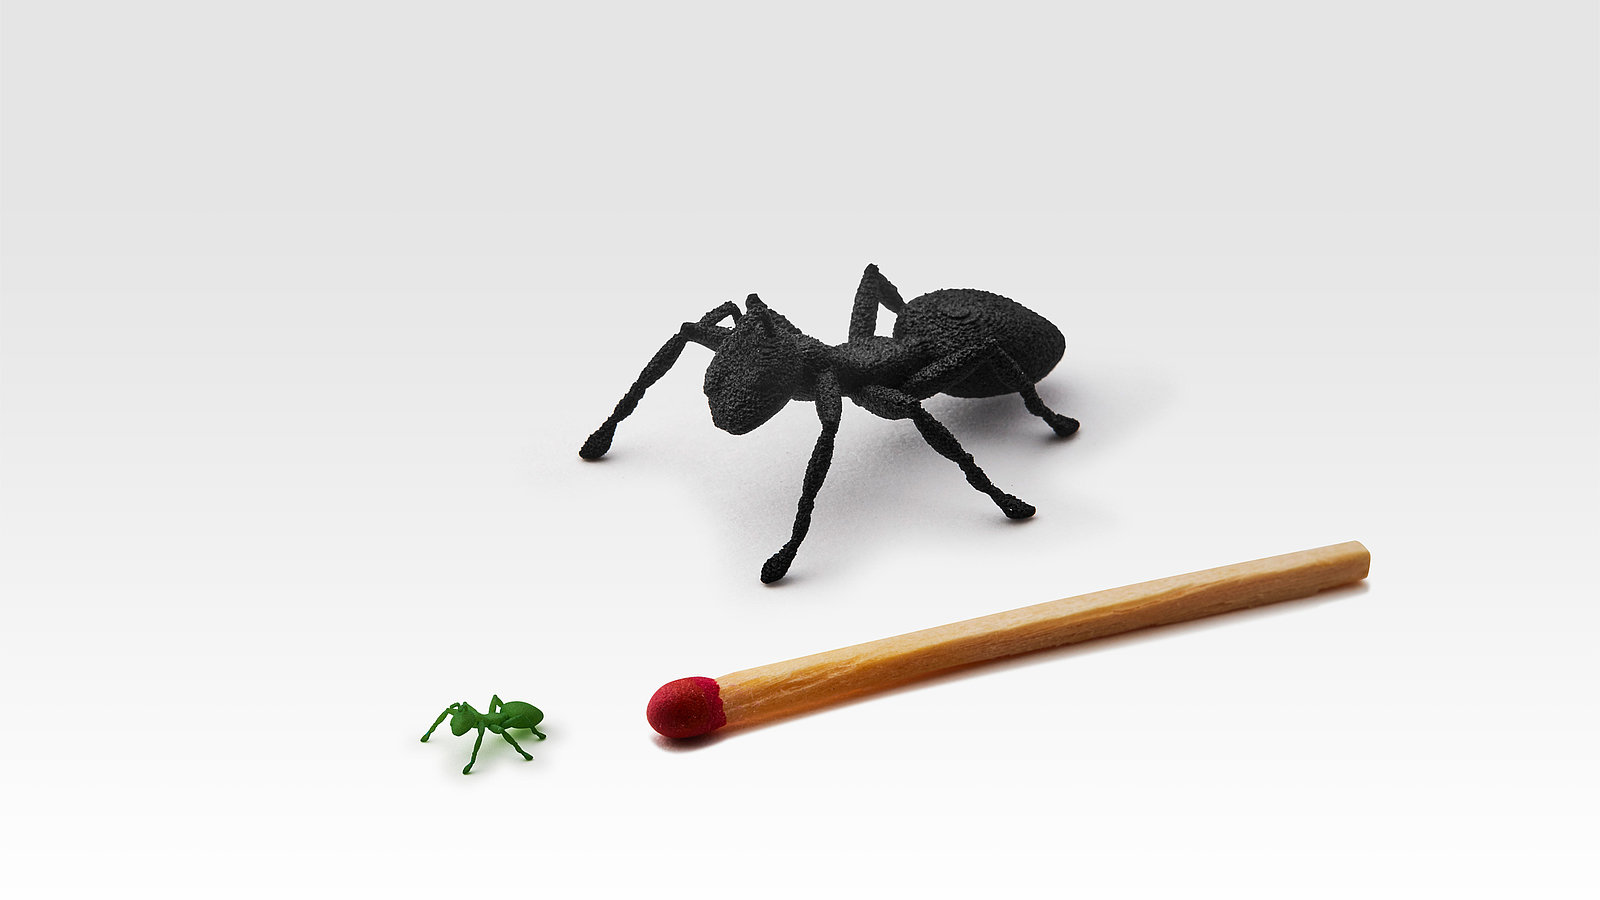 The picture shows a large laser-sintered ant in black, as well as a small green laser-sintered ant the size of the head of a match, which is intended to illustrate the possibilities of the new FDR technology.